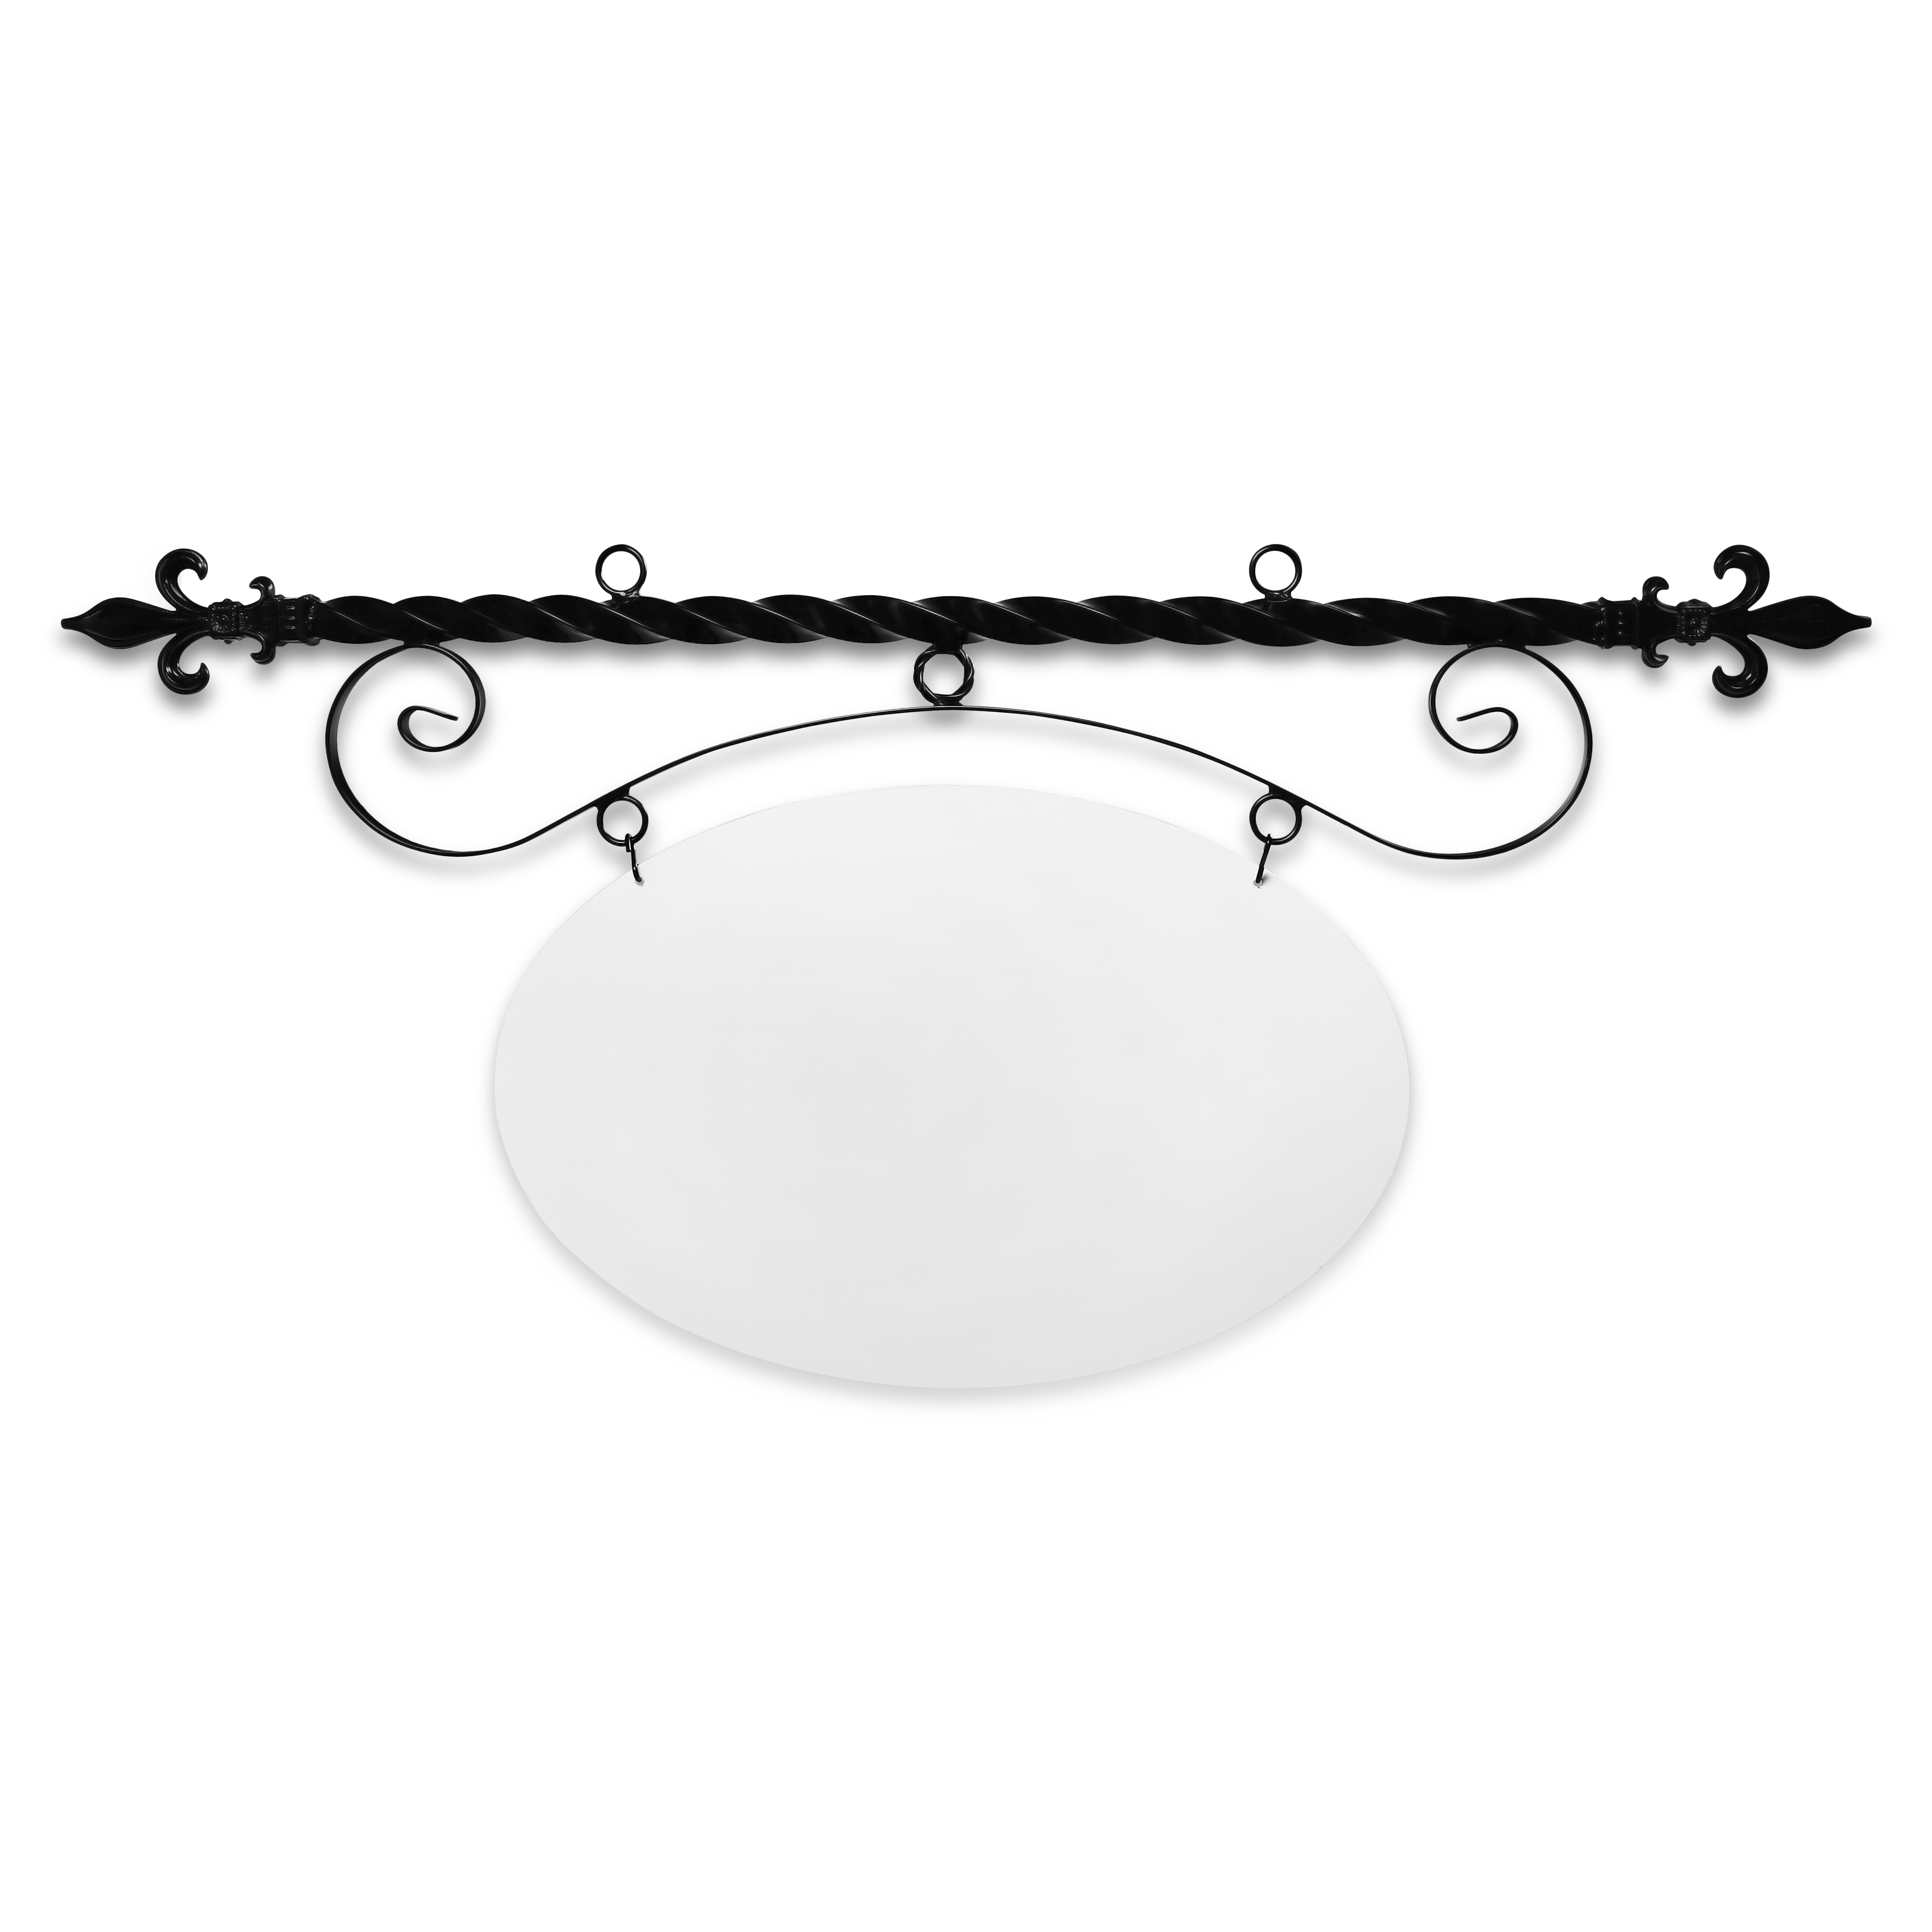 43'' Wide Ceiling Mount Bracket in  Black Powder Coated Steel with 22'' Tall X 33'' Wide X .080'' Thick White Aluminum Sign Blank and 2 Black Powder Coated S-Hooks (Fleur De Lis Finial)